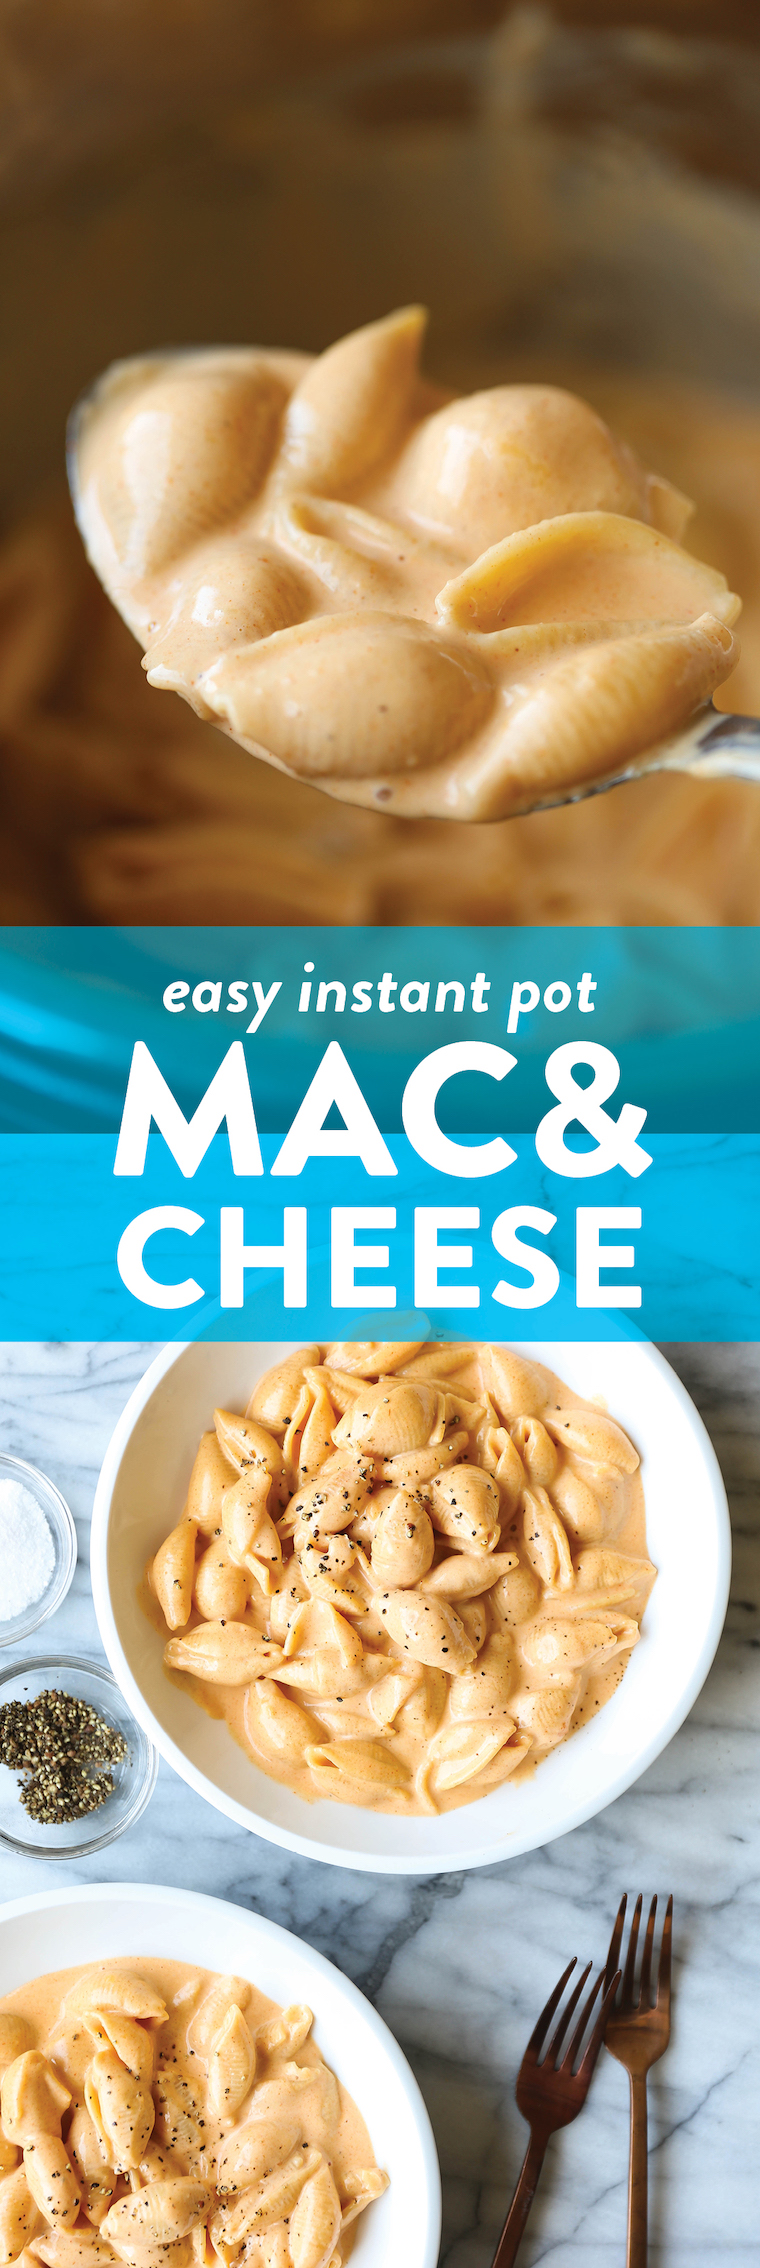 https://s23209.pcdn.co/wp-content/uploads/2019/09/Easy-Instant-Pot-Mac-and-Cheese.jpg